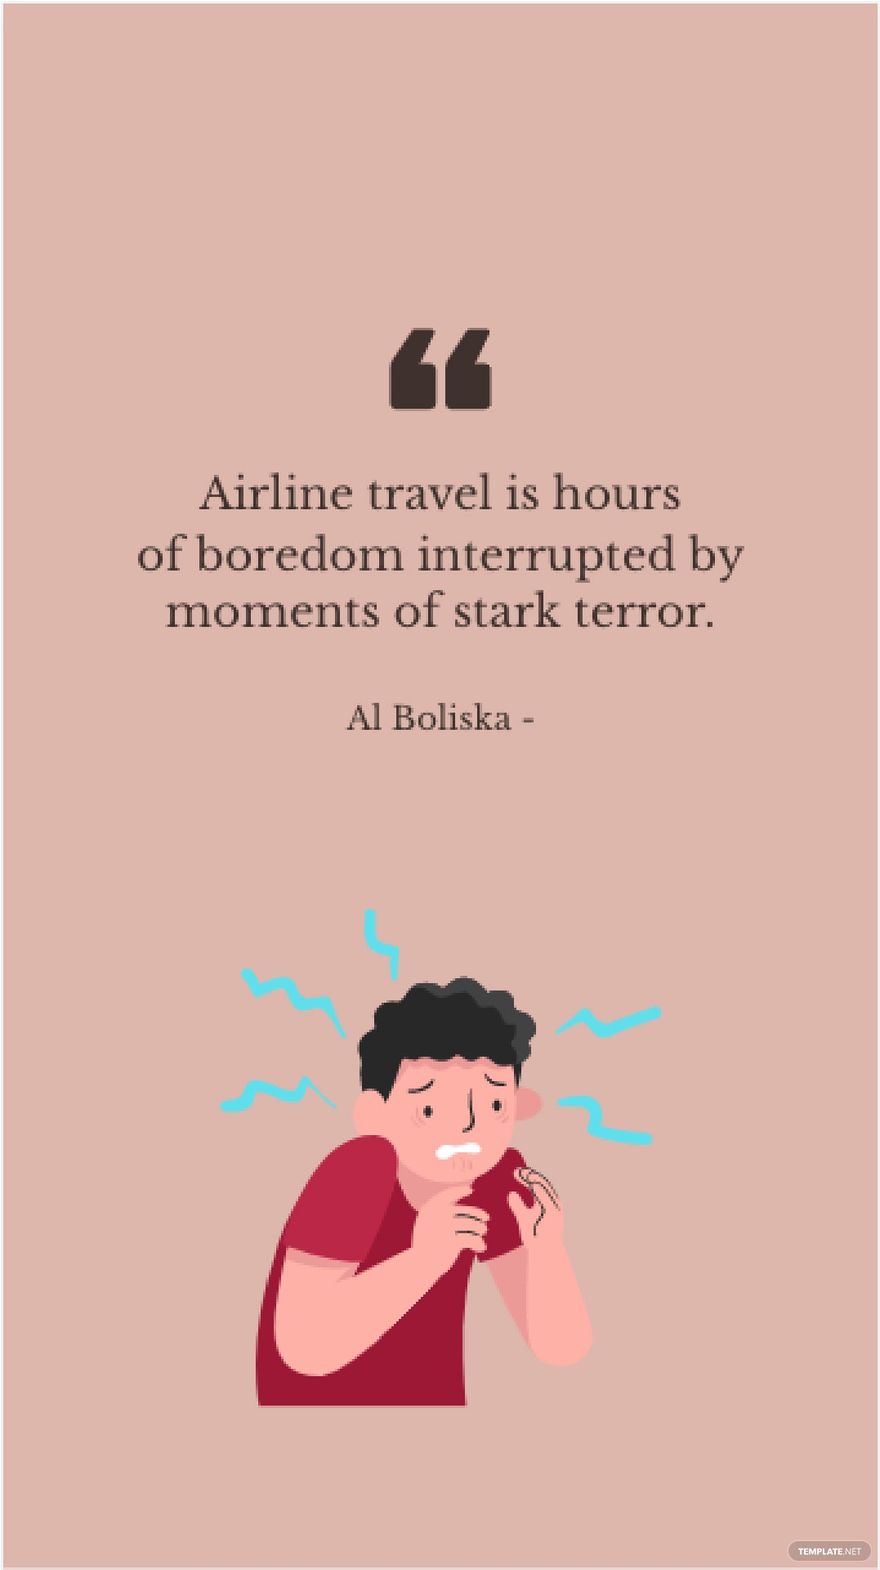 Free Al Boliska - Airline travel is hours of boredom interrupted by moments of stark terror. in JPG